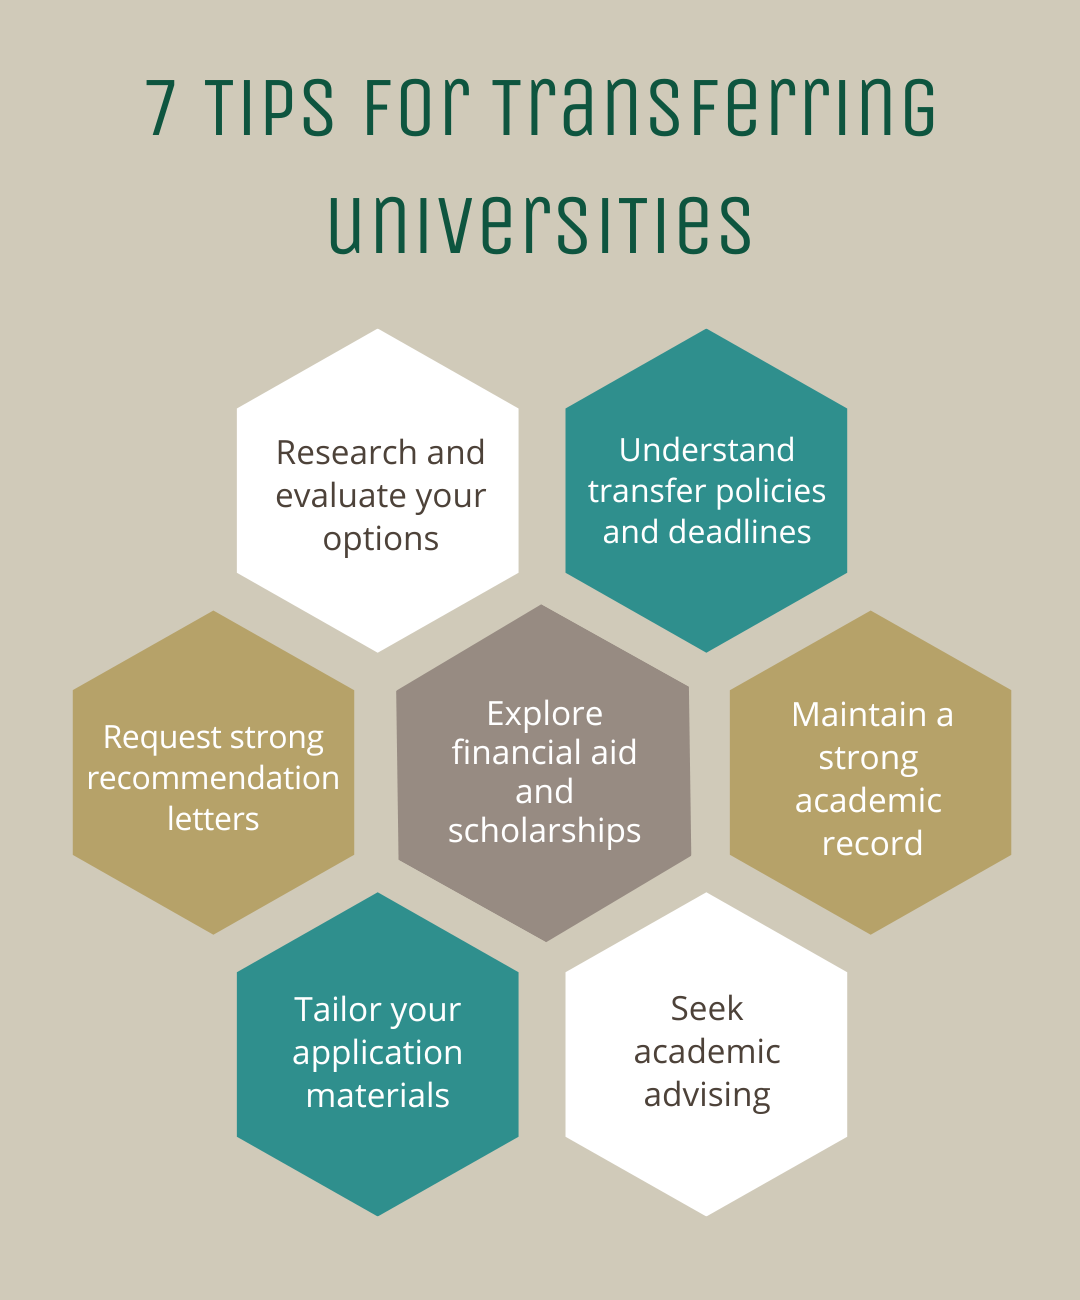 7 Tips for transferring universities. Research and evaluate your options. Understand transfer policies and deadlines. Request strong recommendation letters. Explore financial aid and scholarships. Maintain a strong academic record. Tailor your application materials. Seek academic advertising.